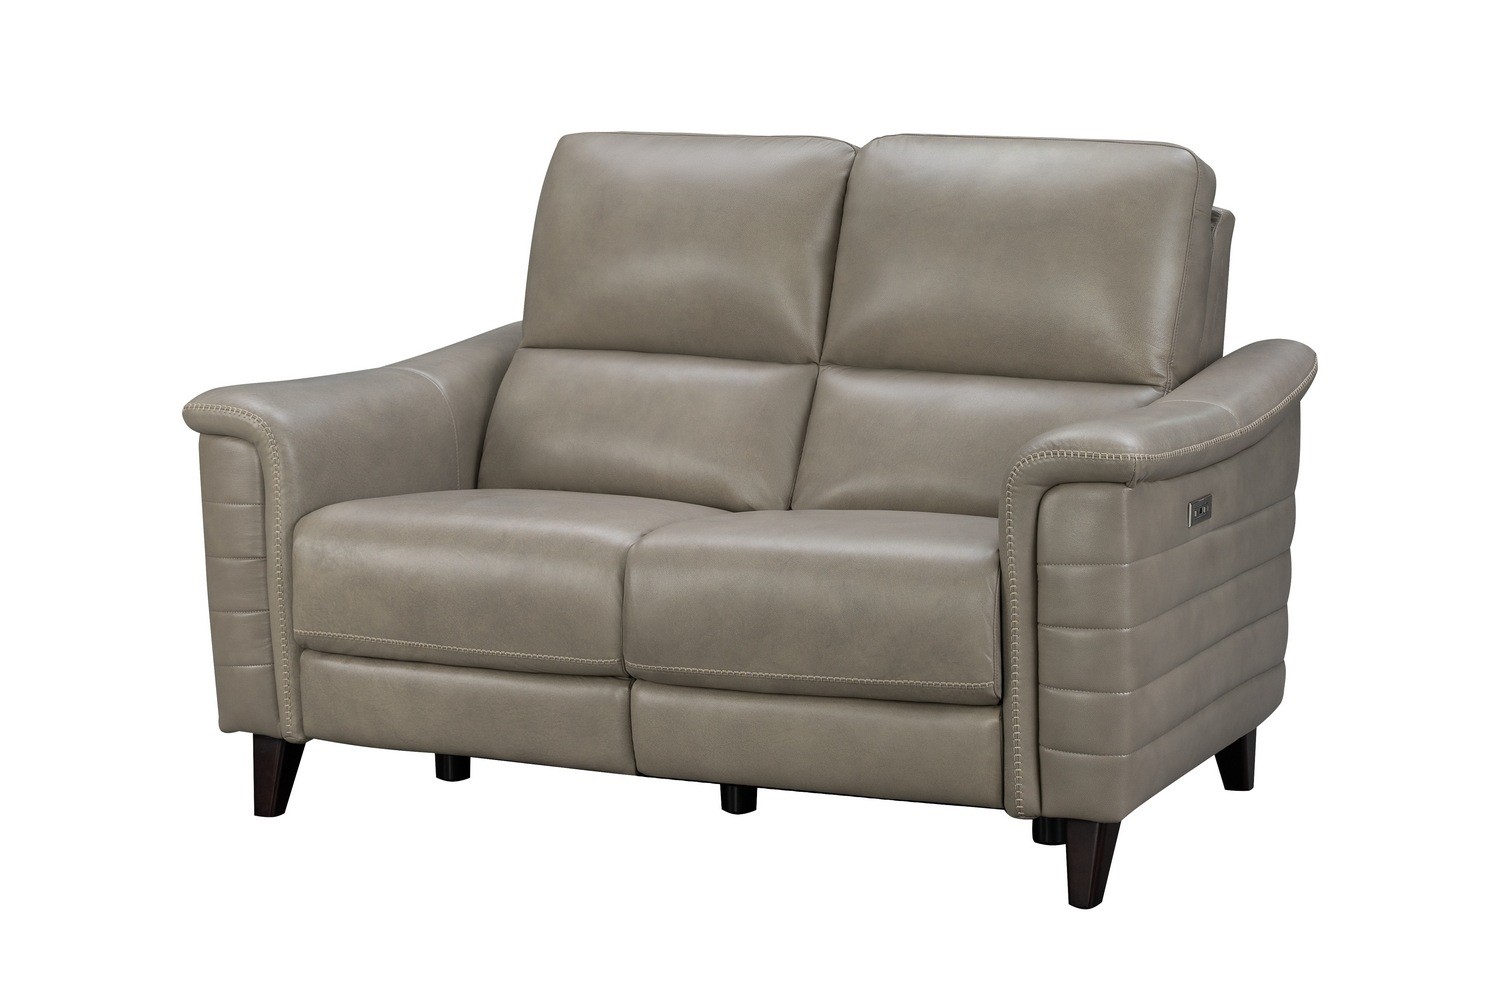 Barcalounger Malone Power Reclining Loveseat with Power Head Rests - Sergi Gray Beige/Leather Match